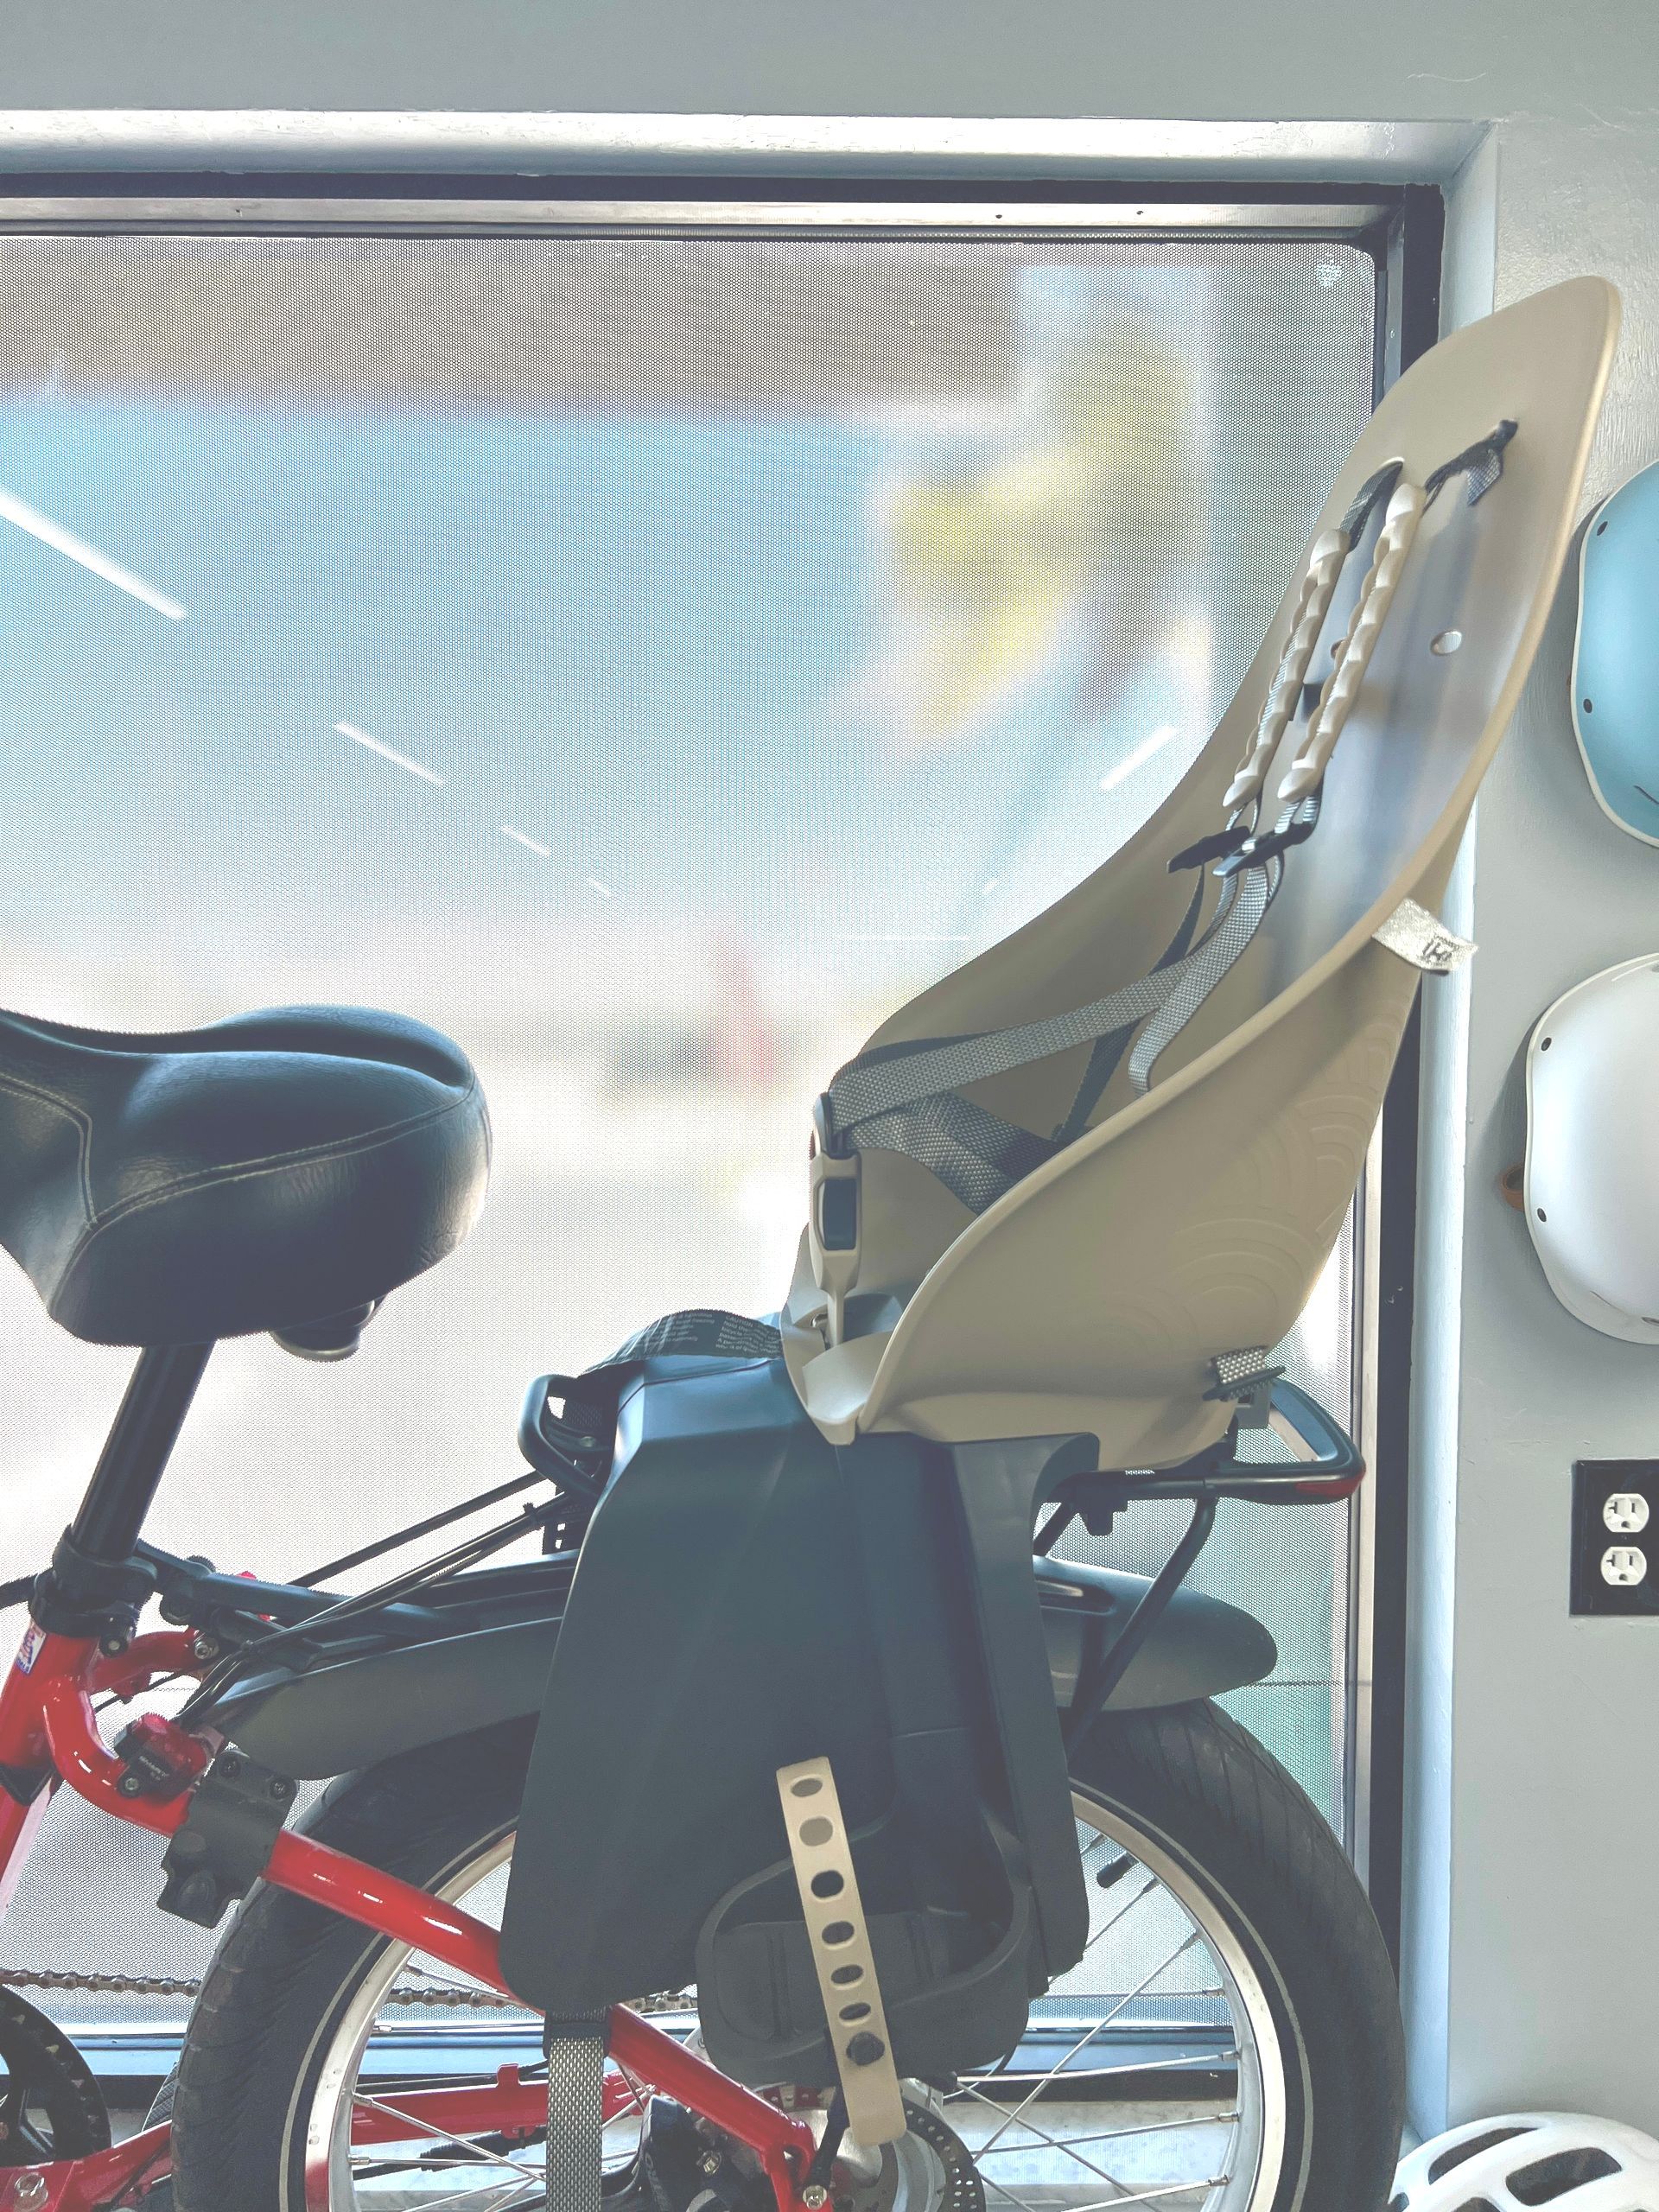 A bicycle with a baby seat attached to it is parked in front of a window.